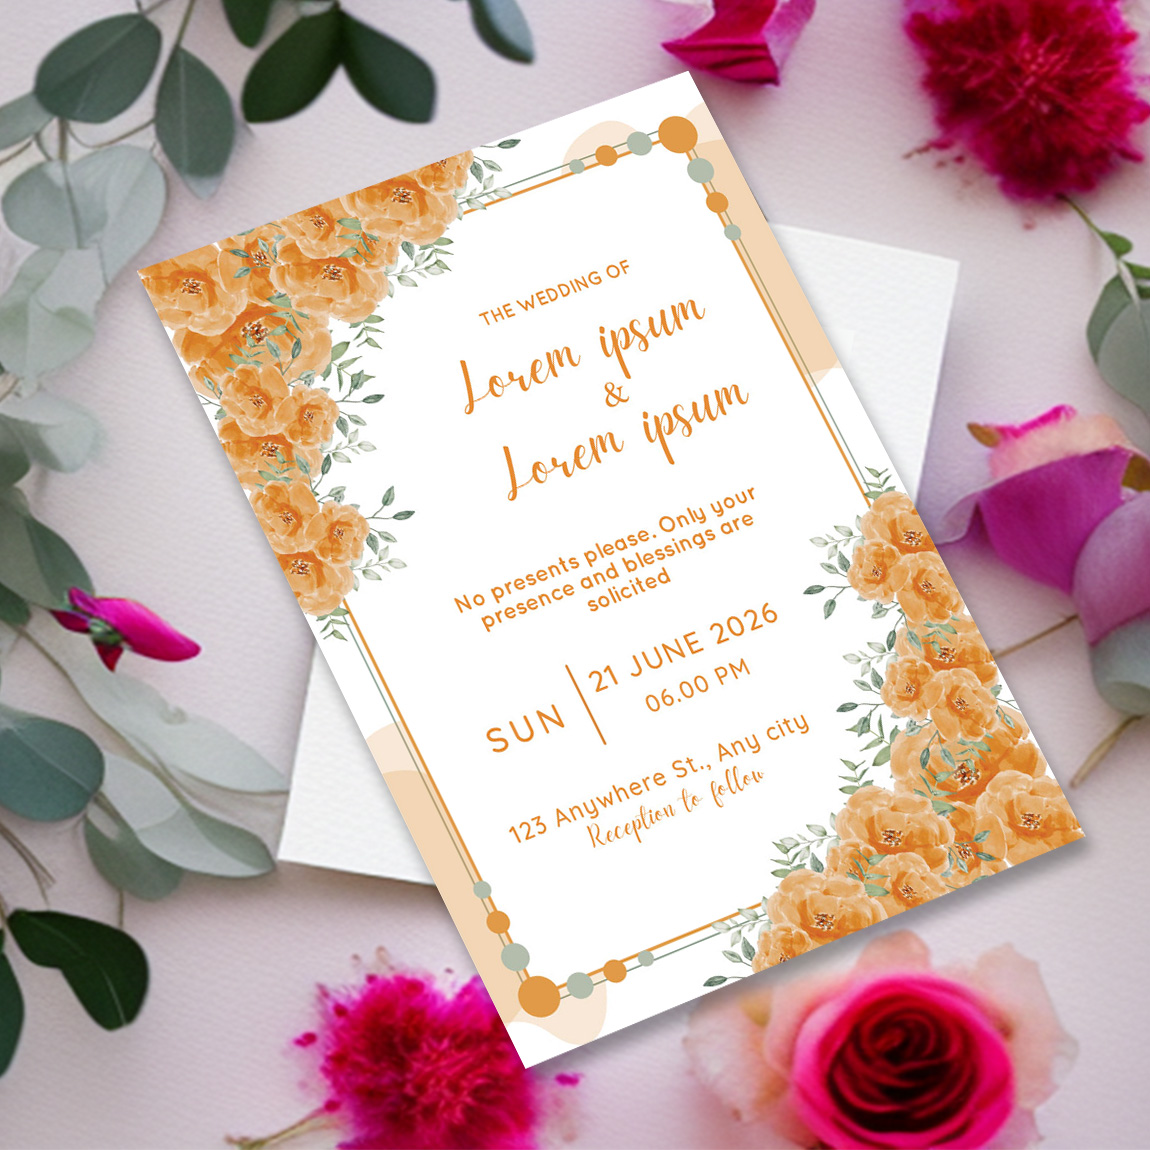 Image with a beautiful wedding invitation with a floral frame of roses.